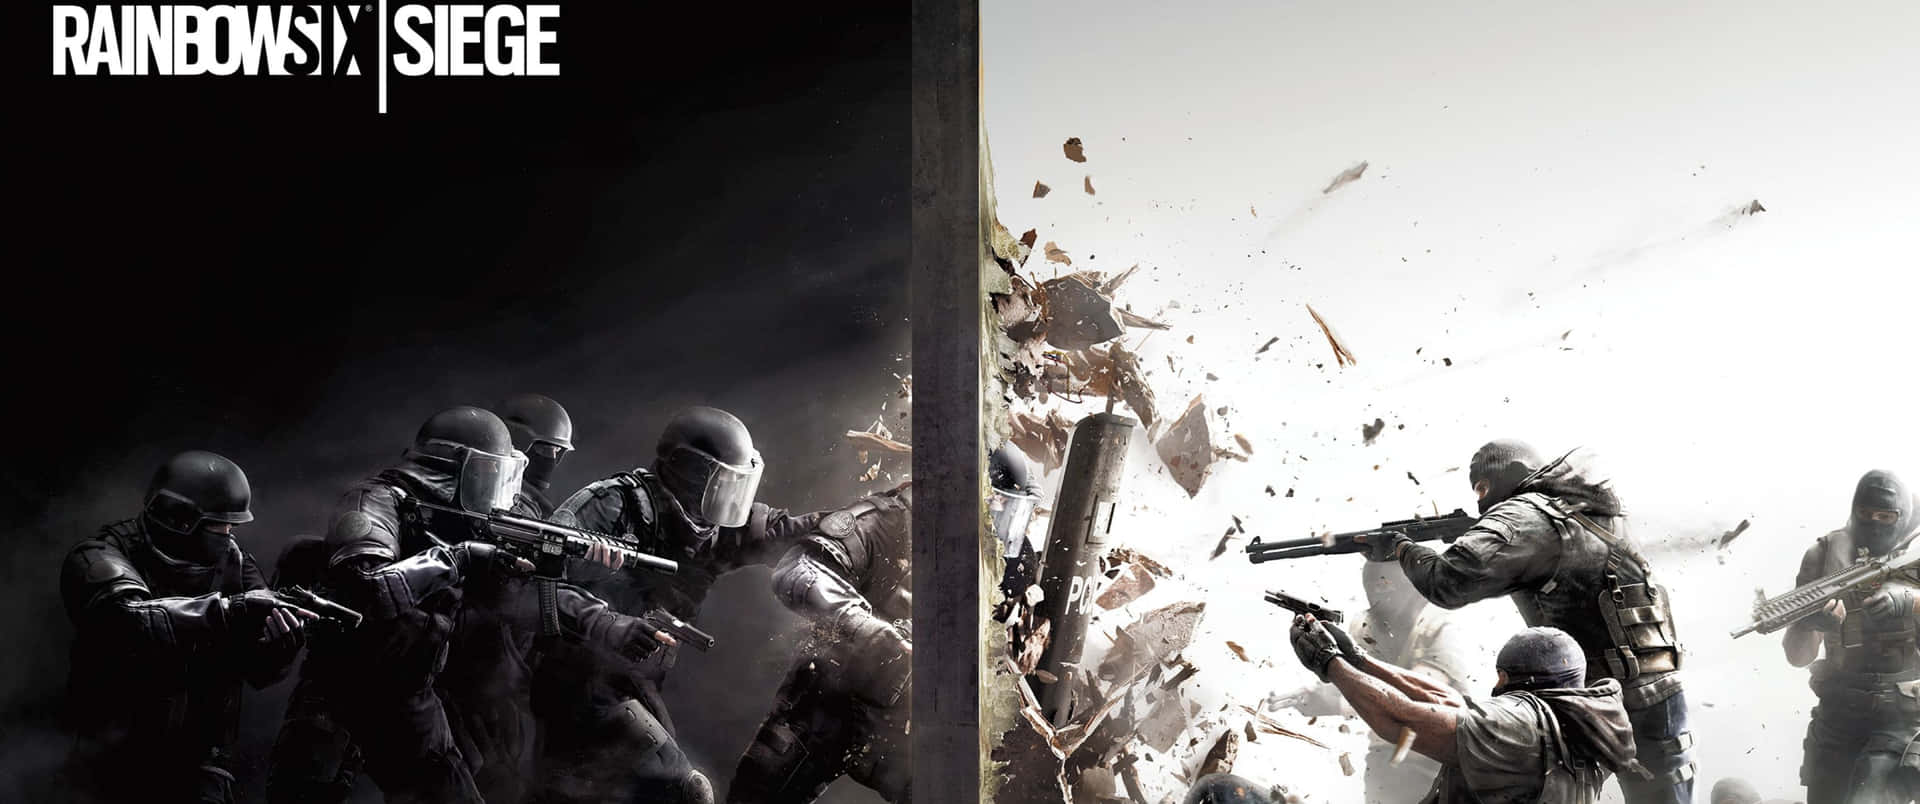 A view of the intense Rainbow Six Siege Video Game